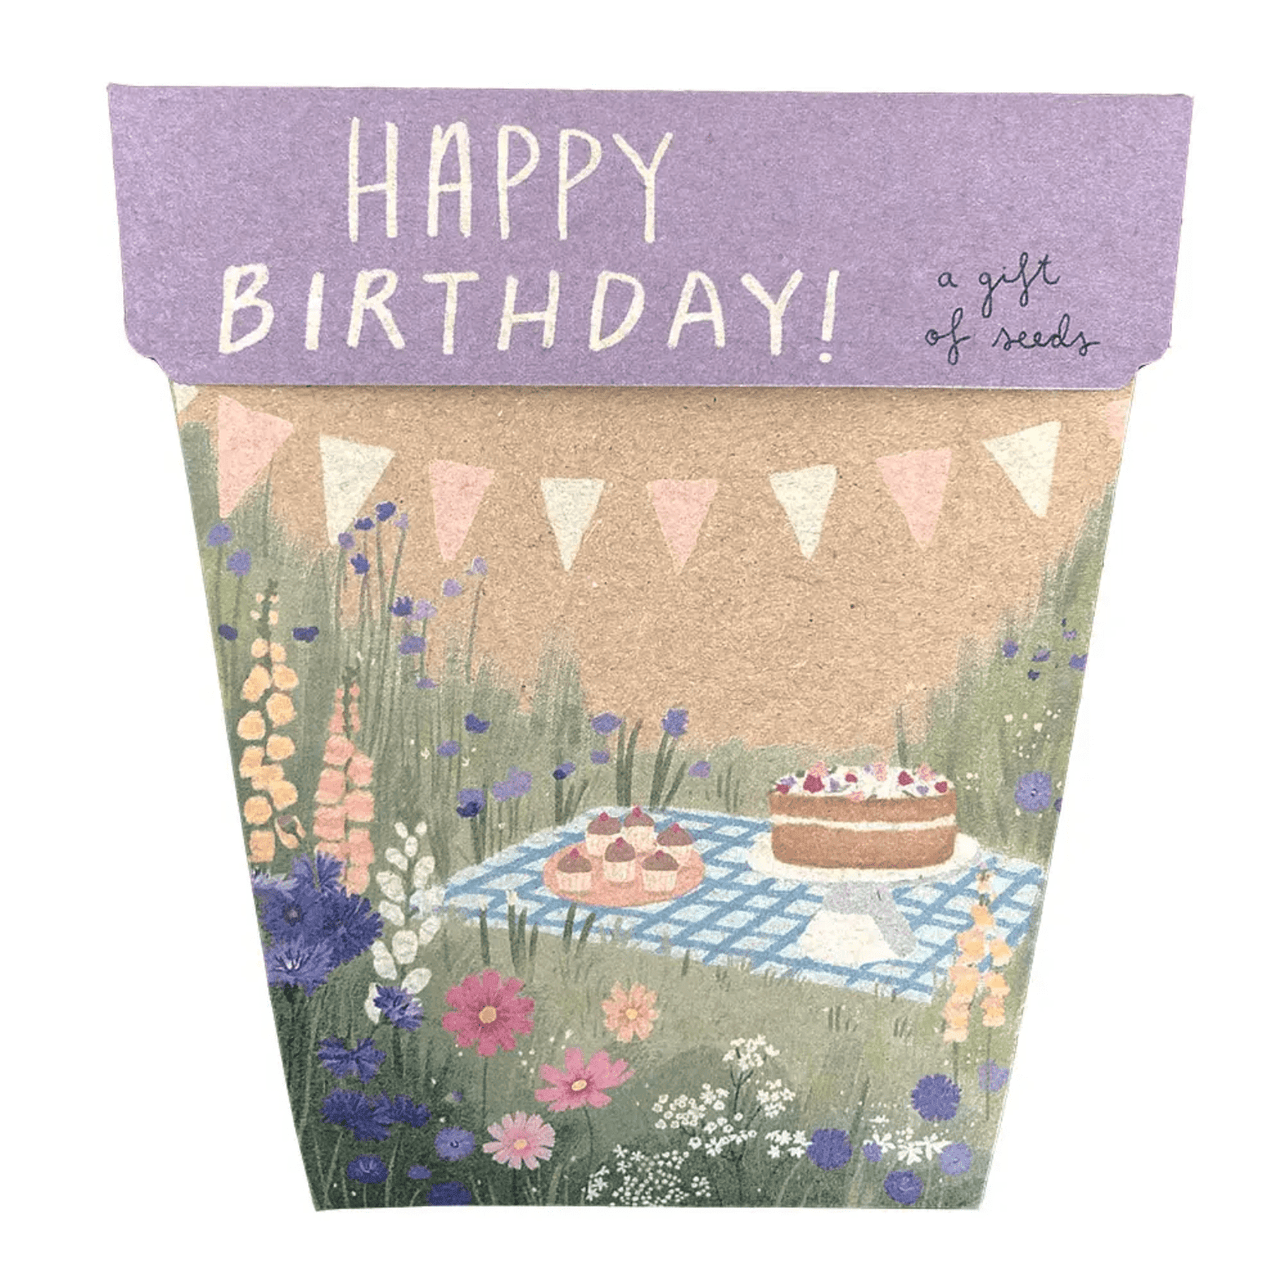 A Seeds - 'Happy Birthday' Picnic from Sow n Sow with a cake and flowers in a pot.